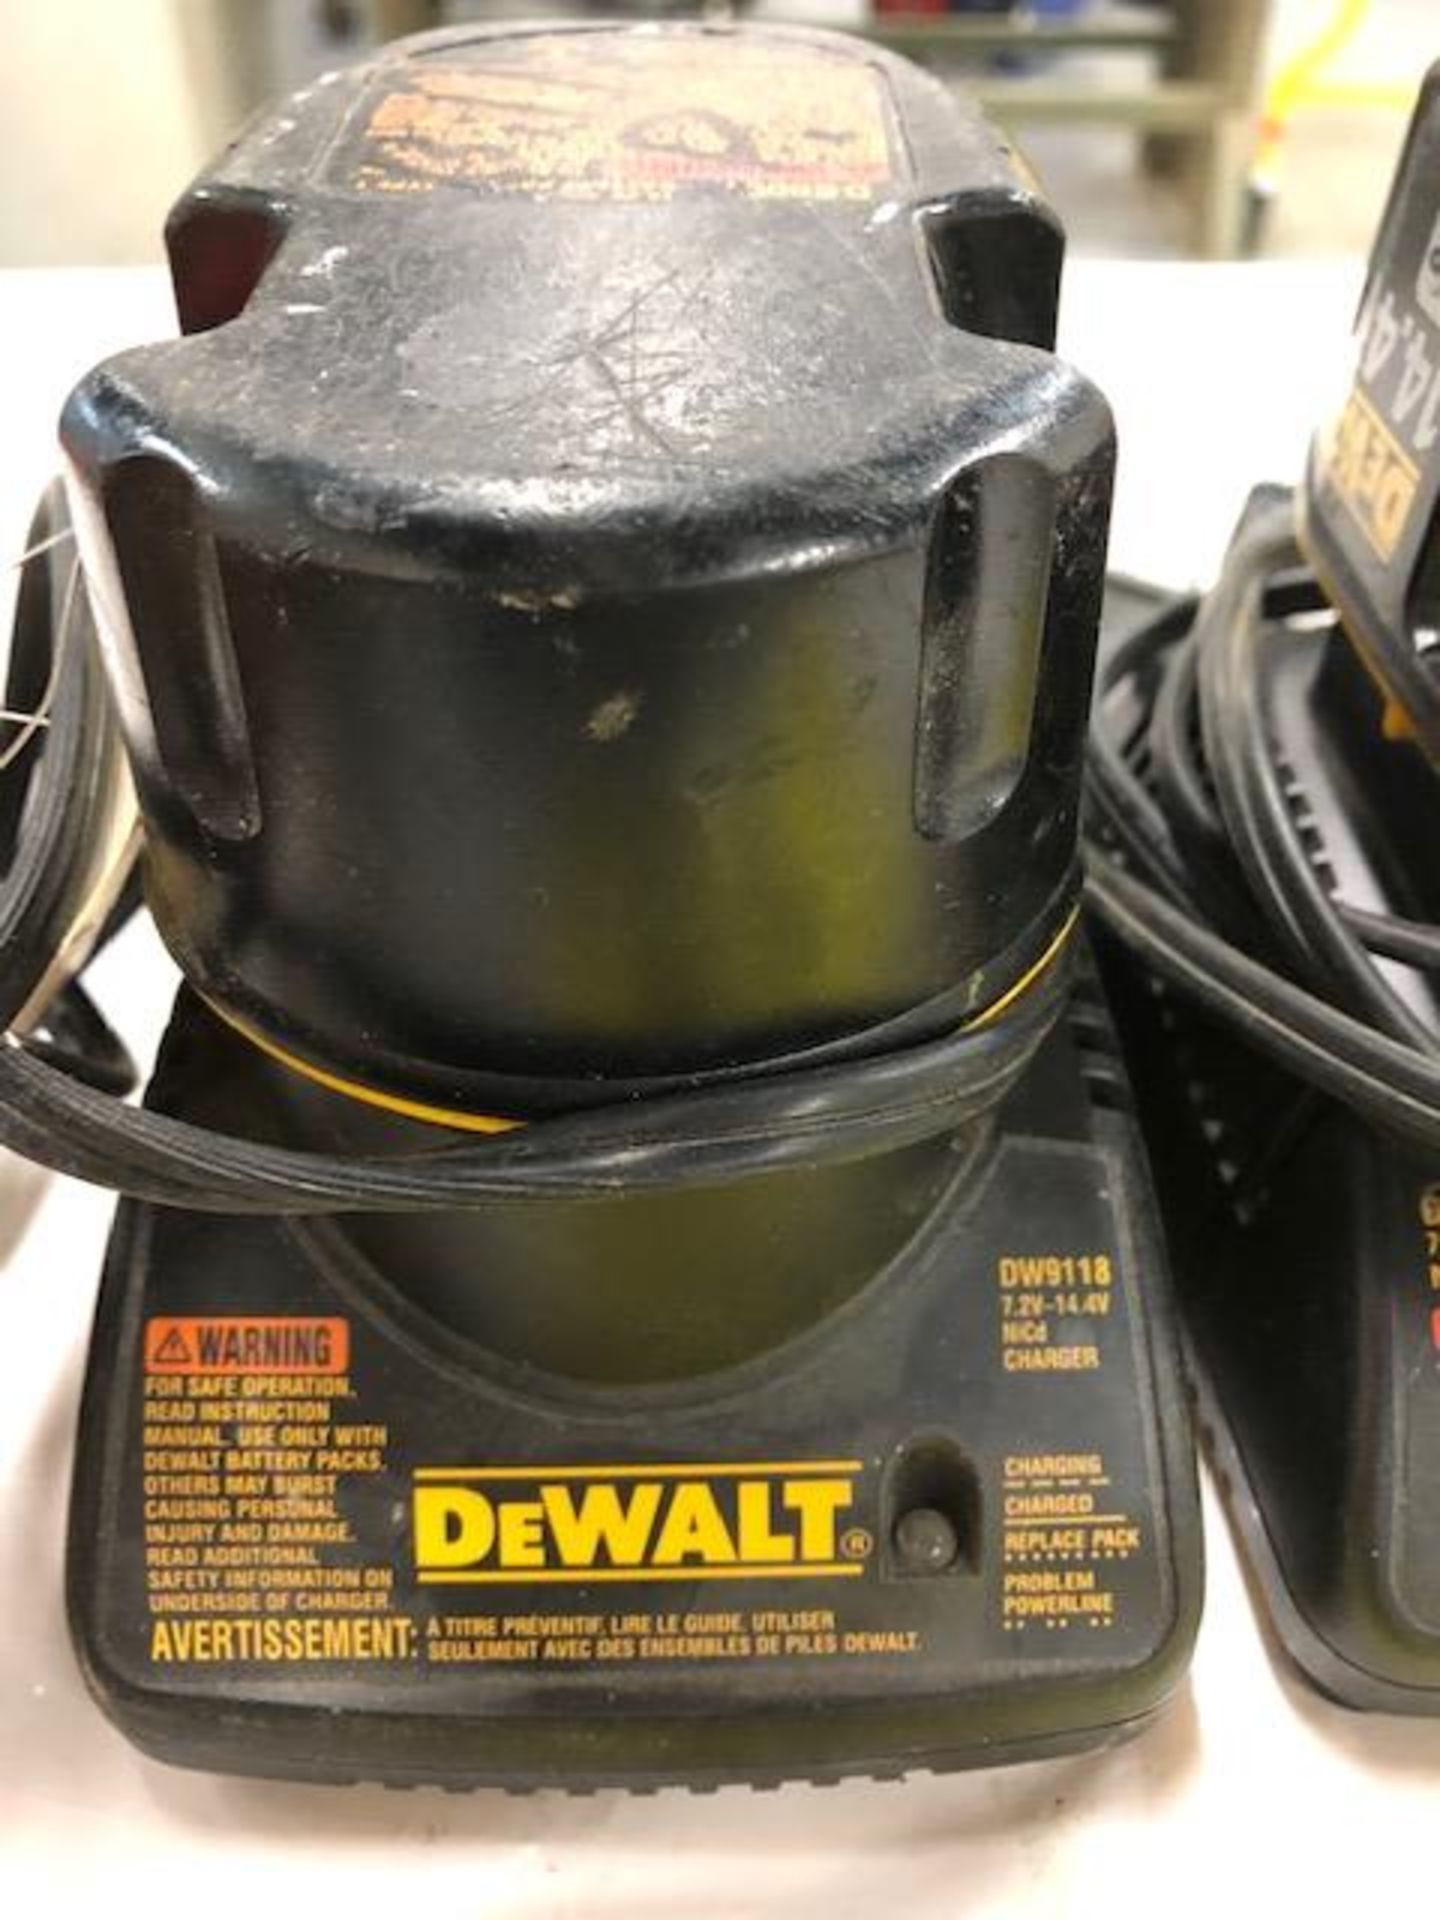 LOT OF DEWALT, 14.4 V, BATTERIES AND CHARGERS - Image 2 of 4